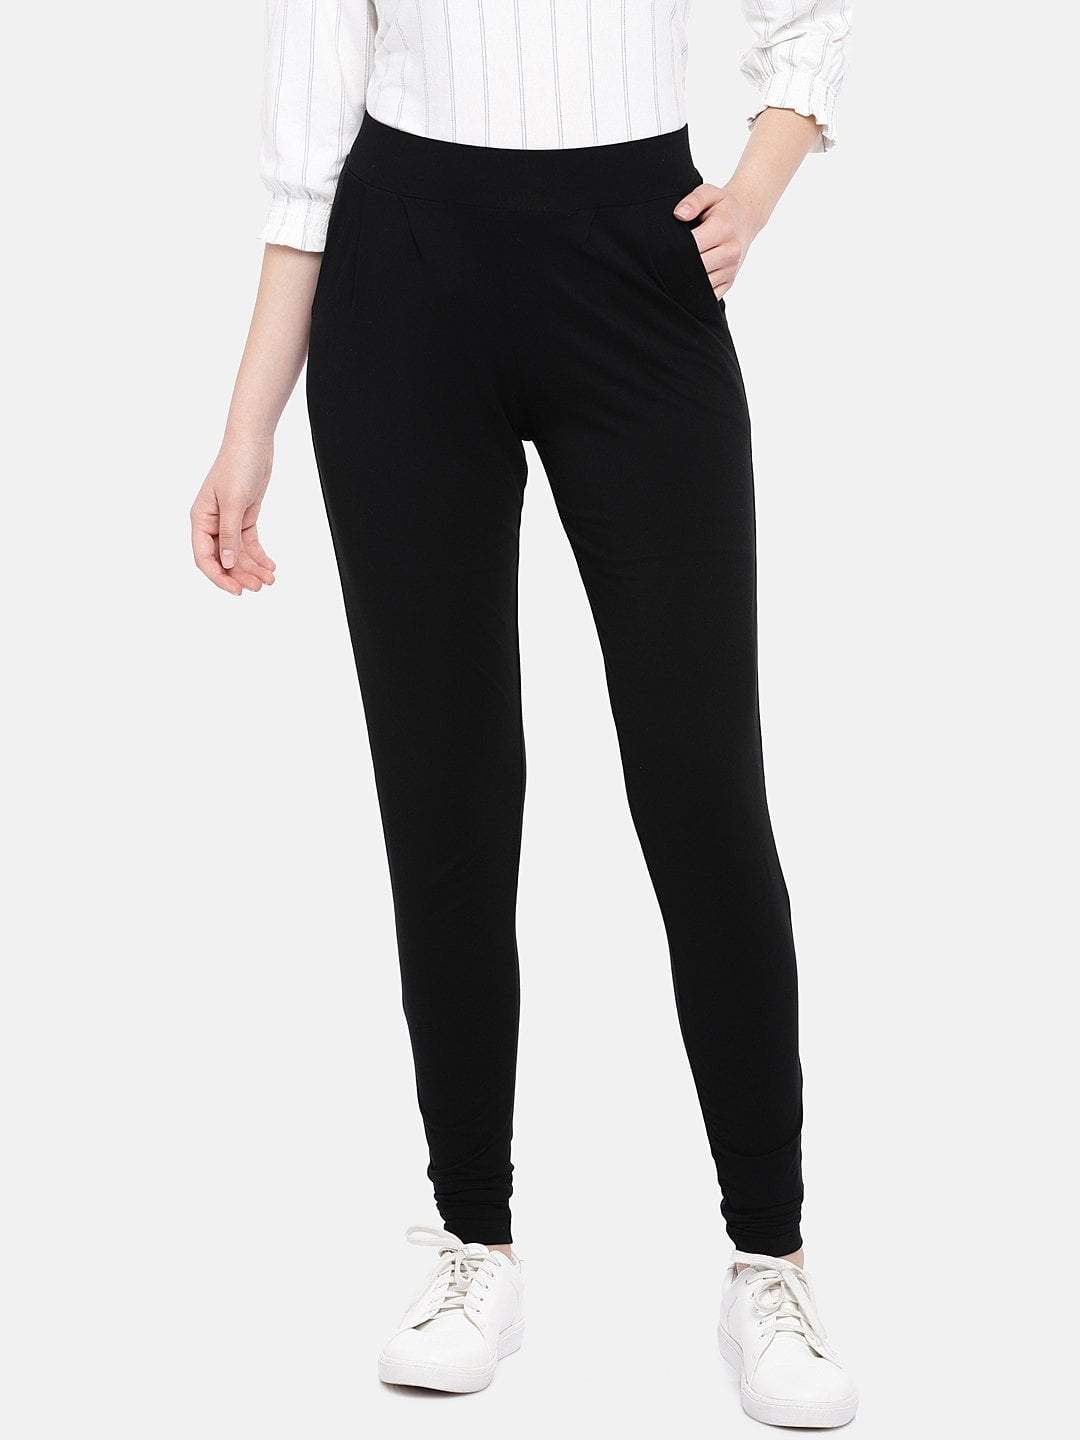 Buy Loose Pants For Women Online In India At Best Price Offers